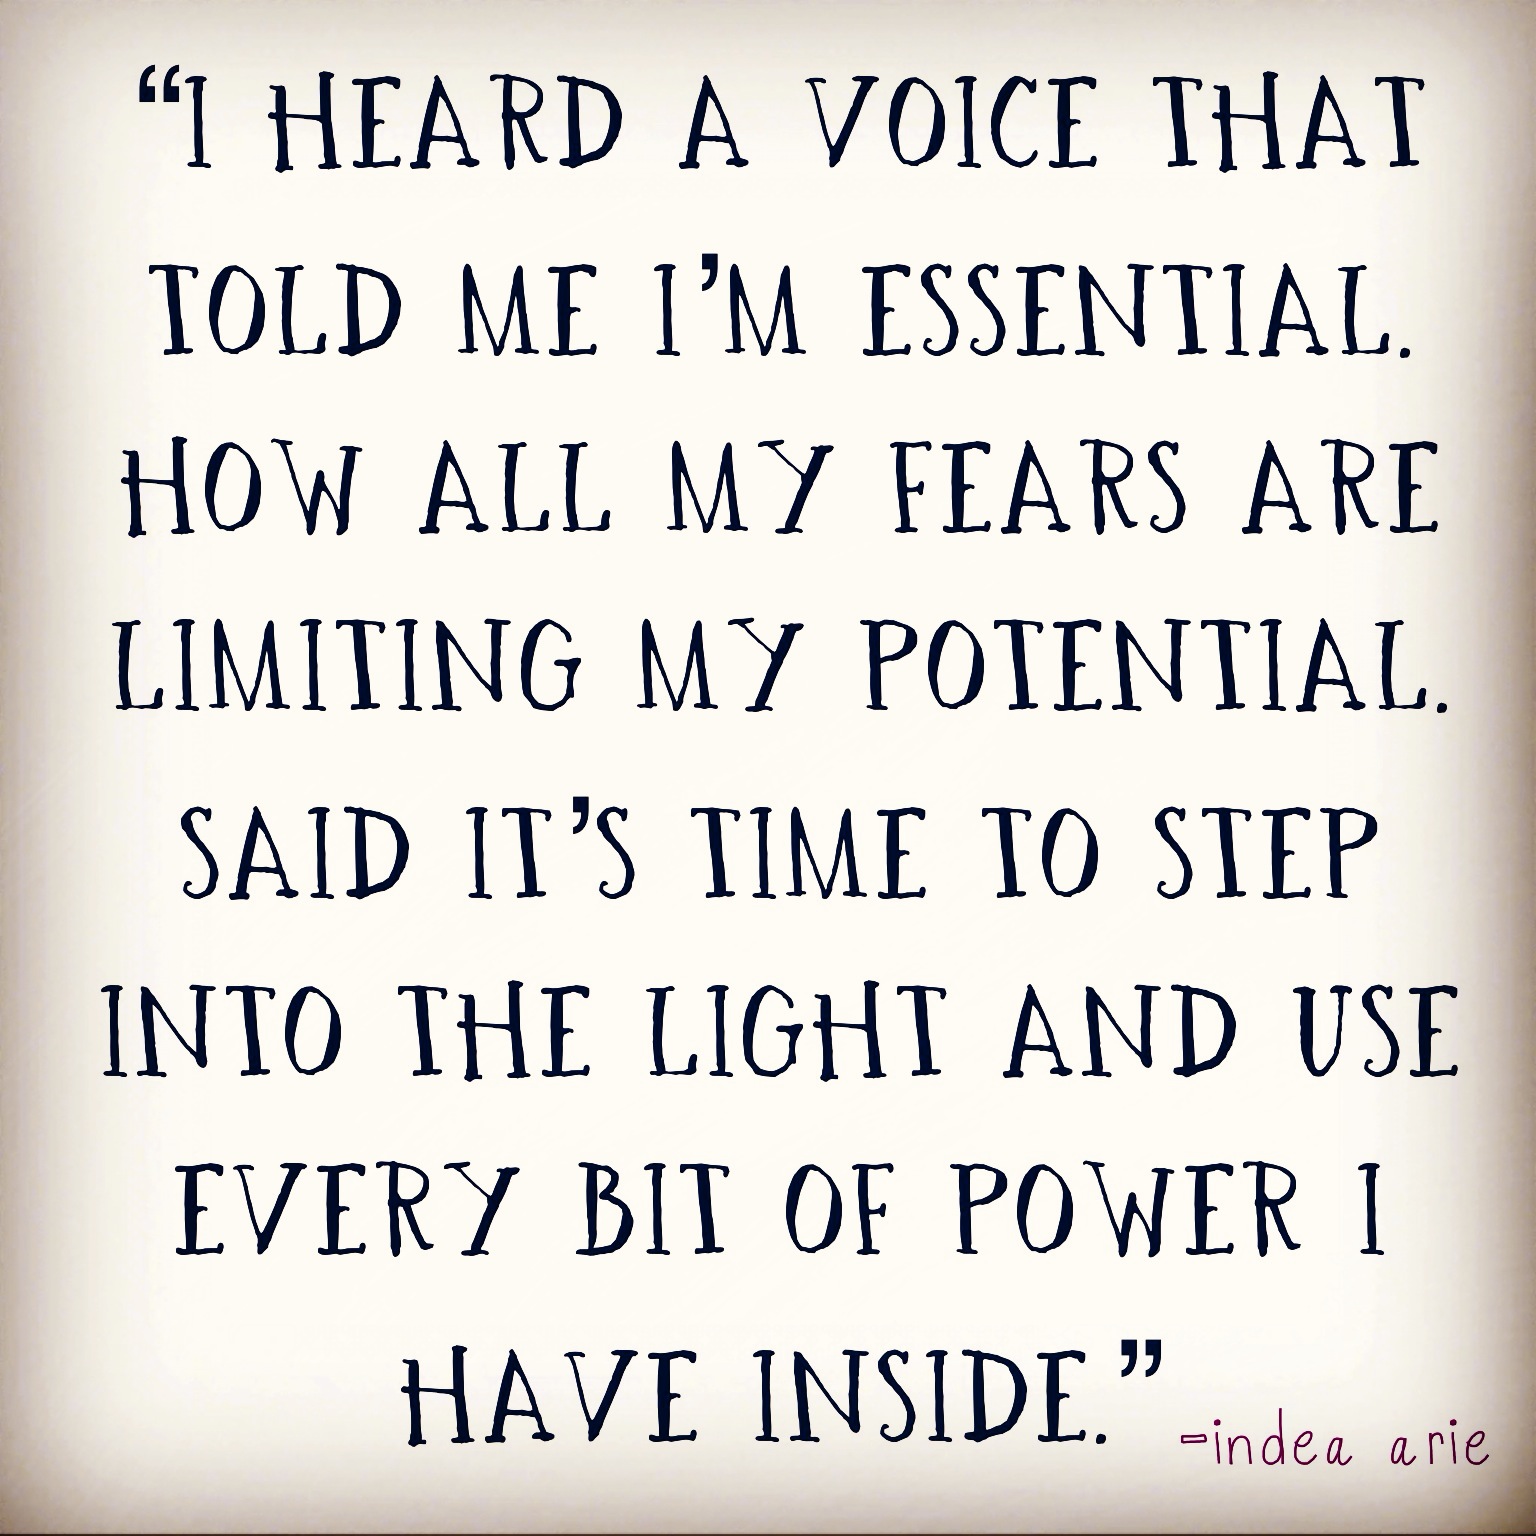 I heard a voice that told me I’m essential. How all my fears are limiting my potential. Said it’s time to step into the light and use every bit of power i have inside. Indea Arie